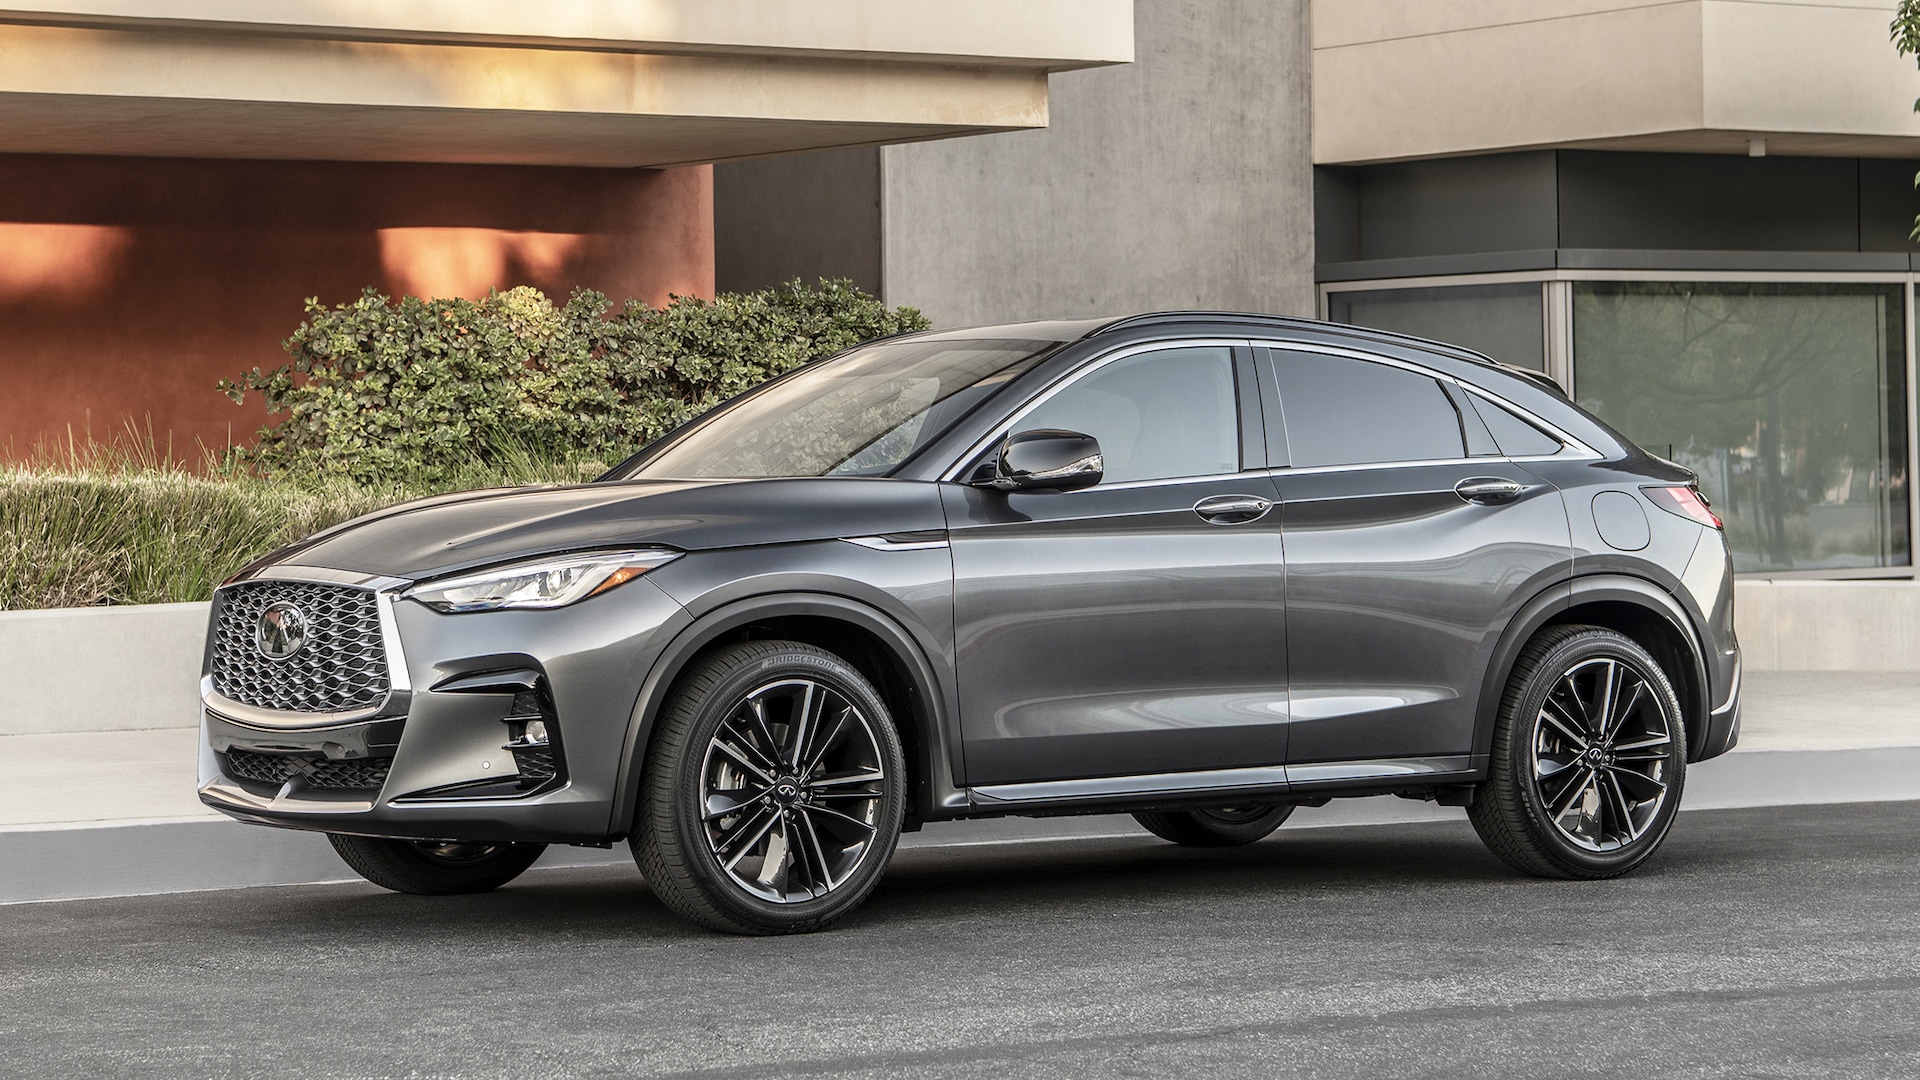 2023 Infiniti QX55 Prices, Reviews, and Photos - MotorTrend